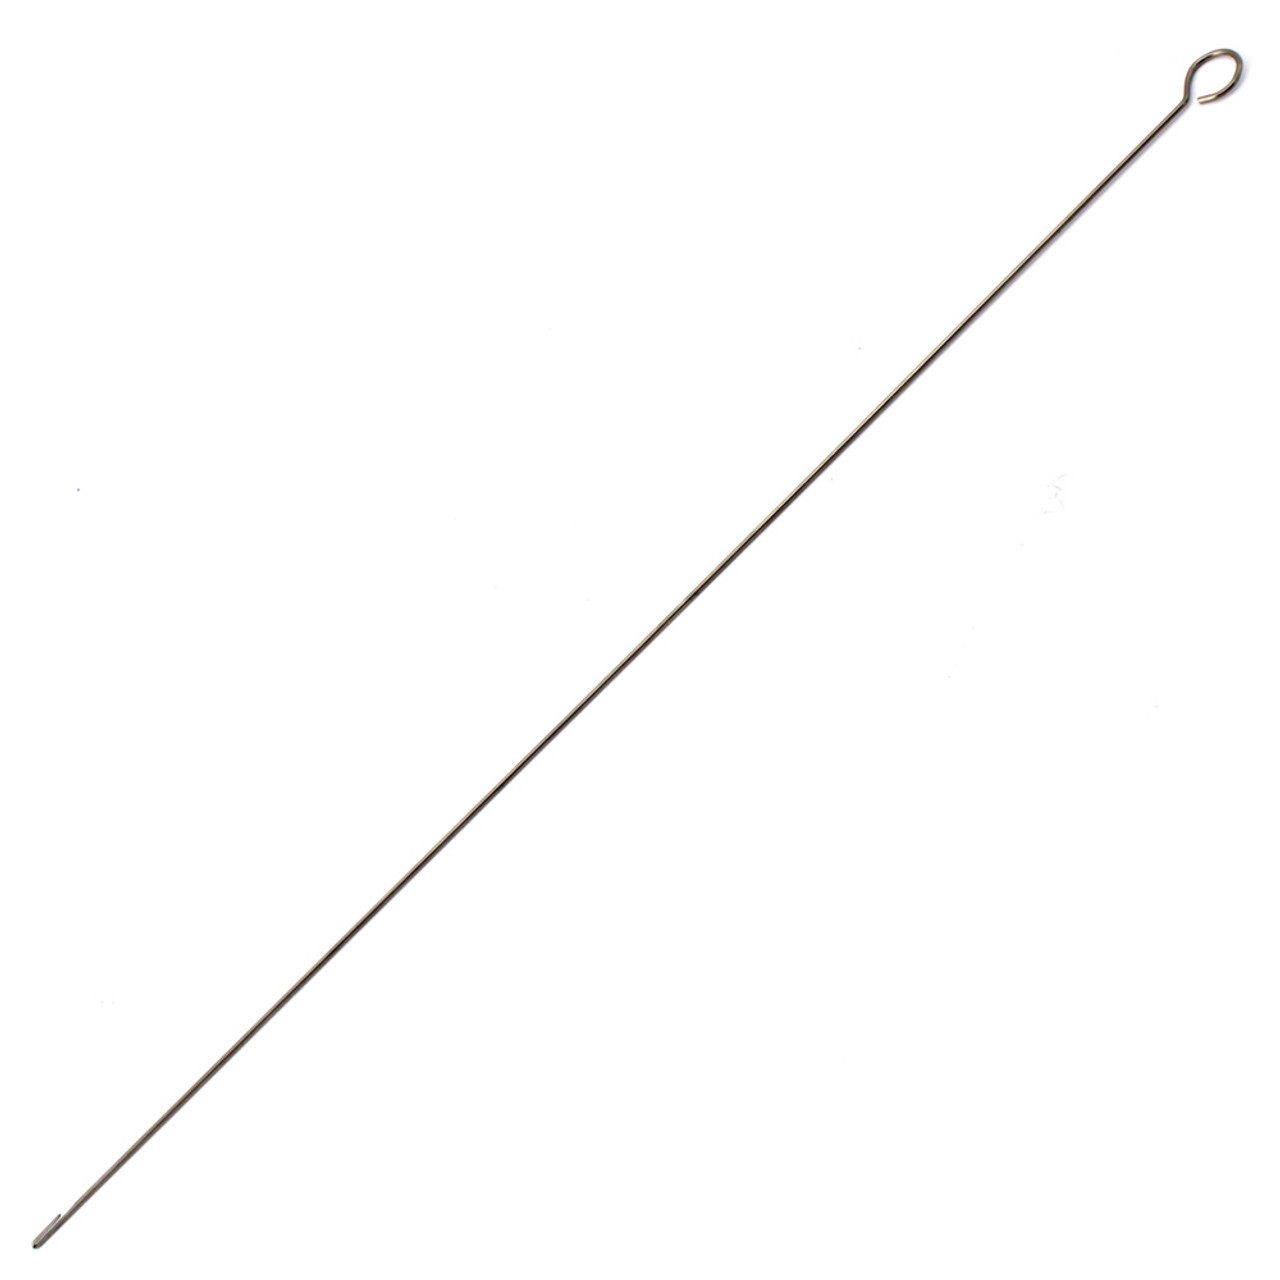 Elastic Cord Needle, Stainless Steel, 8.0 in (20.32 cm), diameter appx.  0.787 mm (0.03 in), 1 pc